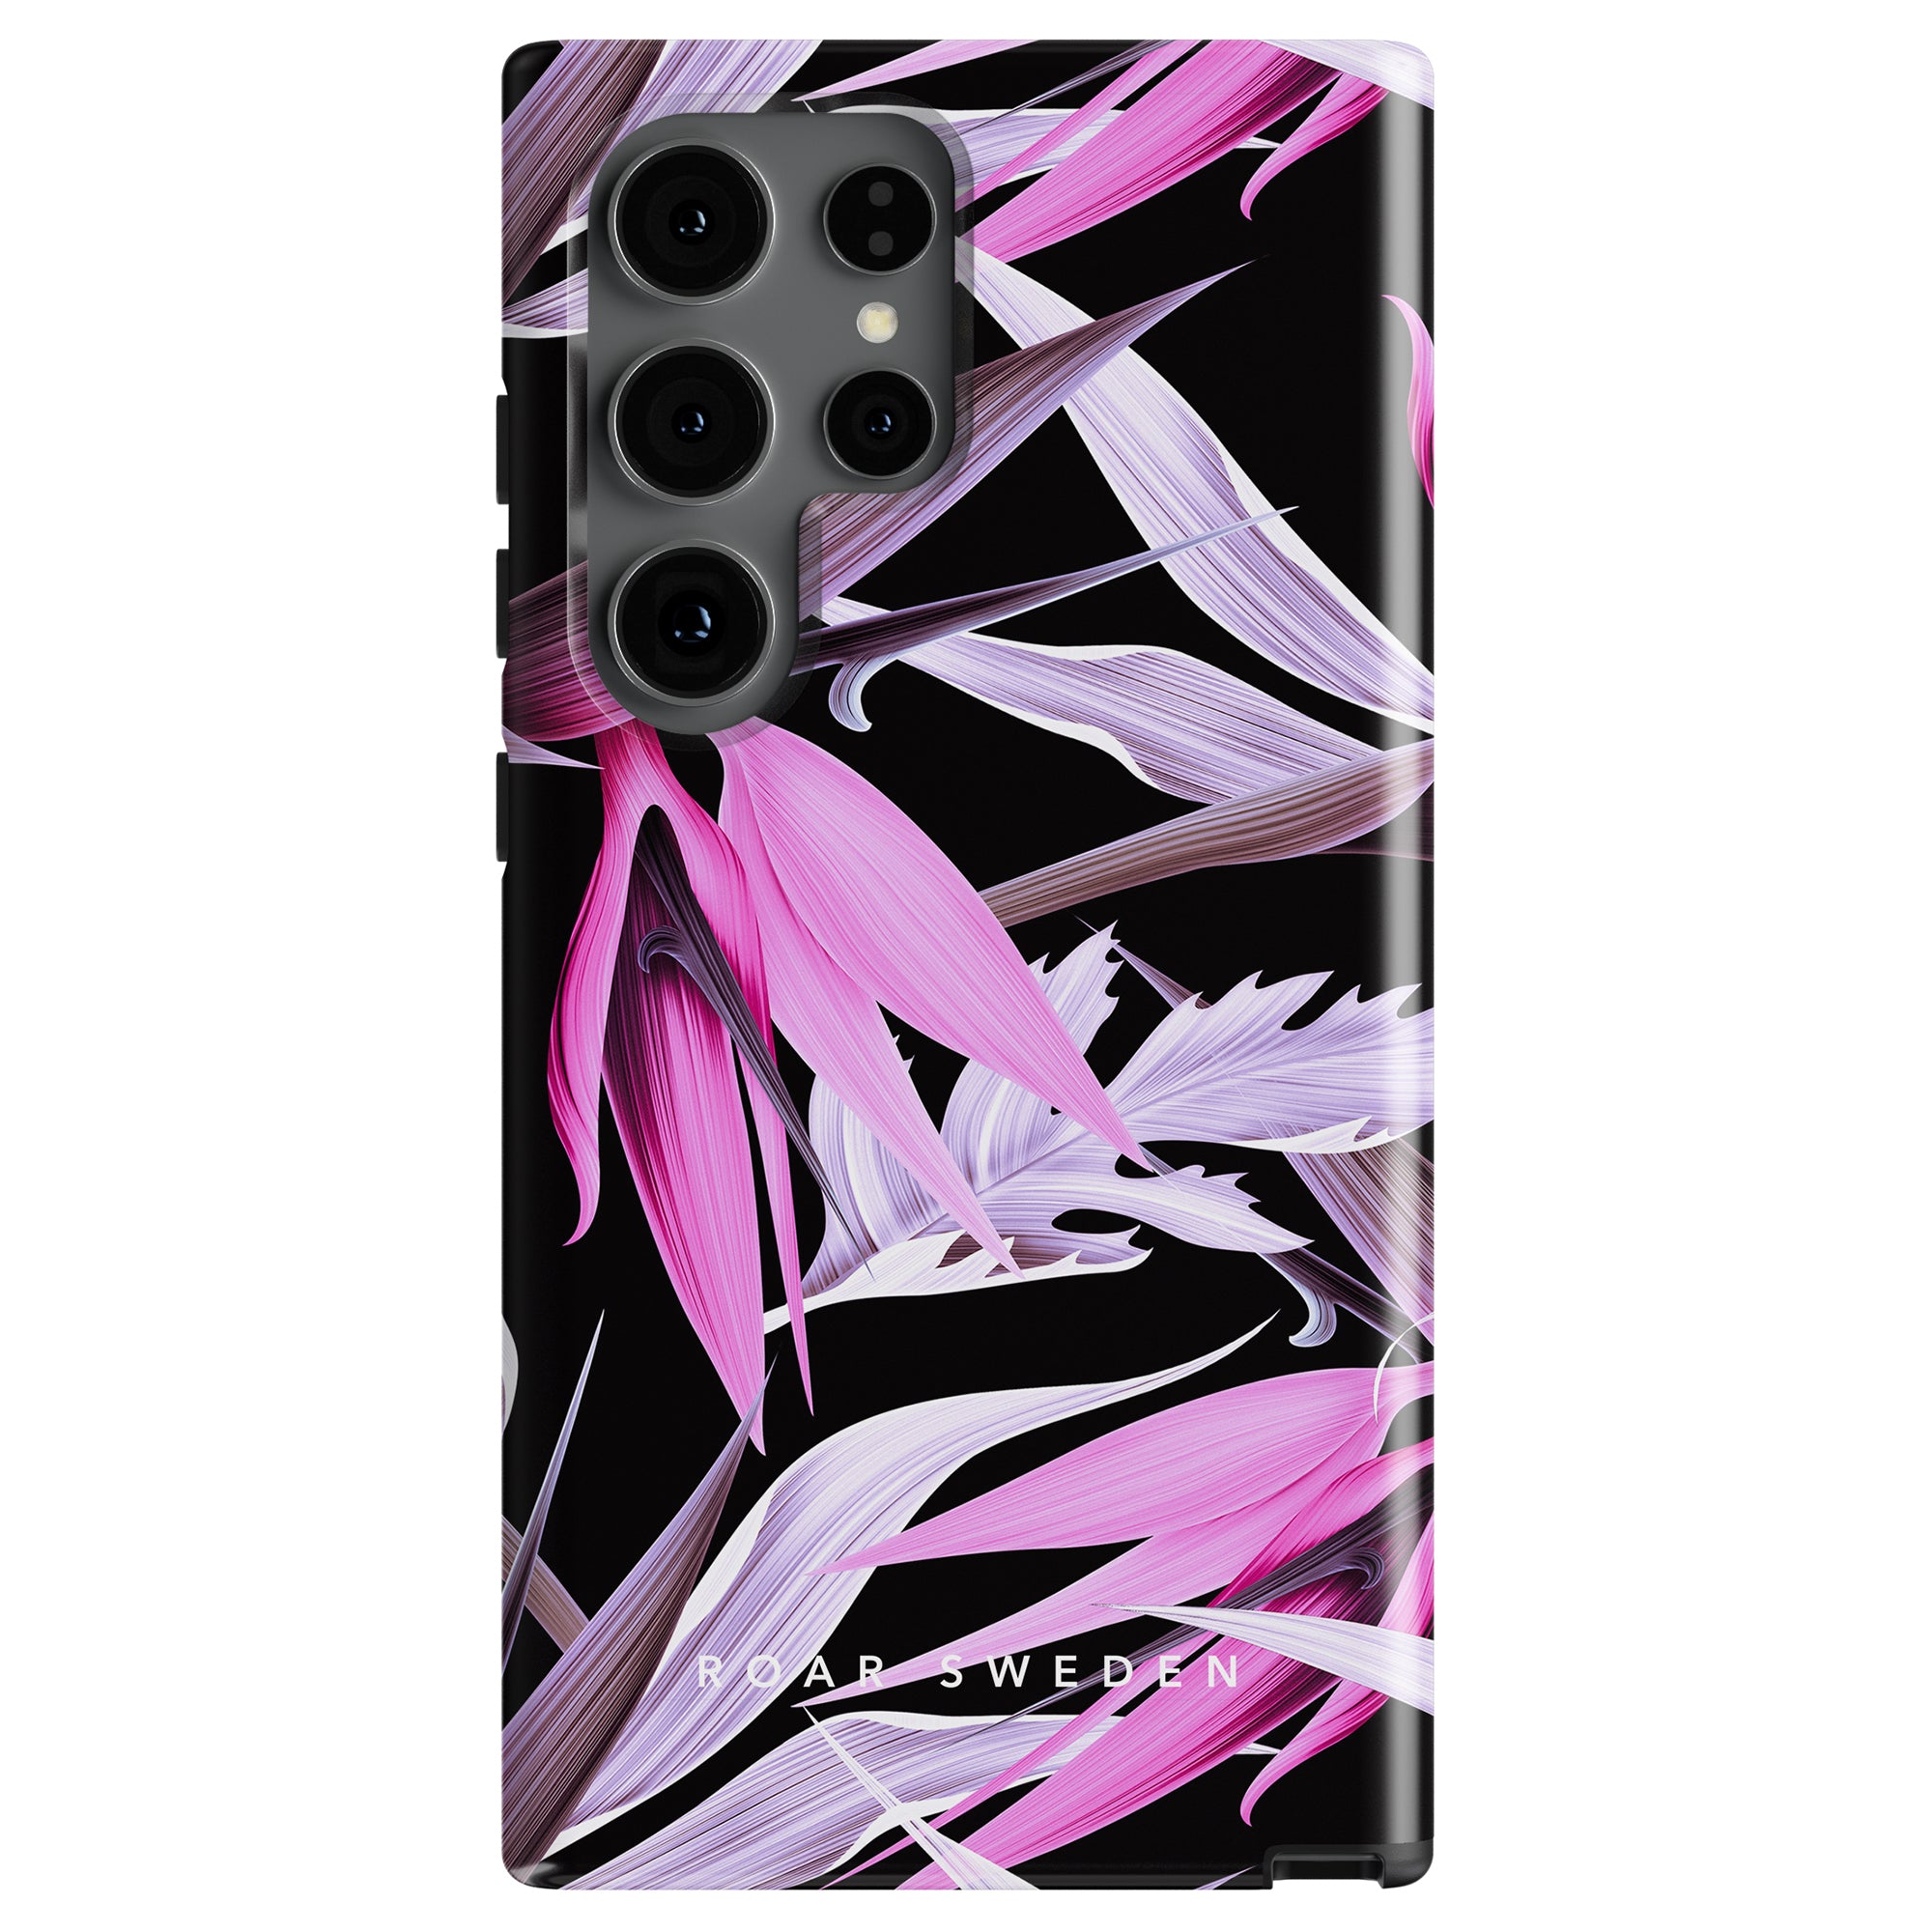 A smartphone with a black "Tropical Night - Tough case" featuring pink and purple abstract floral designs. Four camera lenses are visible on the back. The text "ROAR SWEDEN" appears near the bottom, adding an element of romantik och förförisk charm.